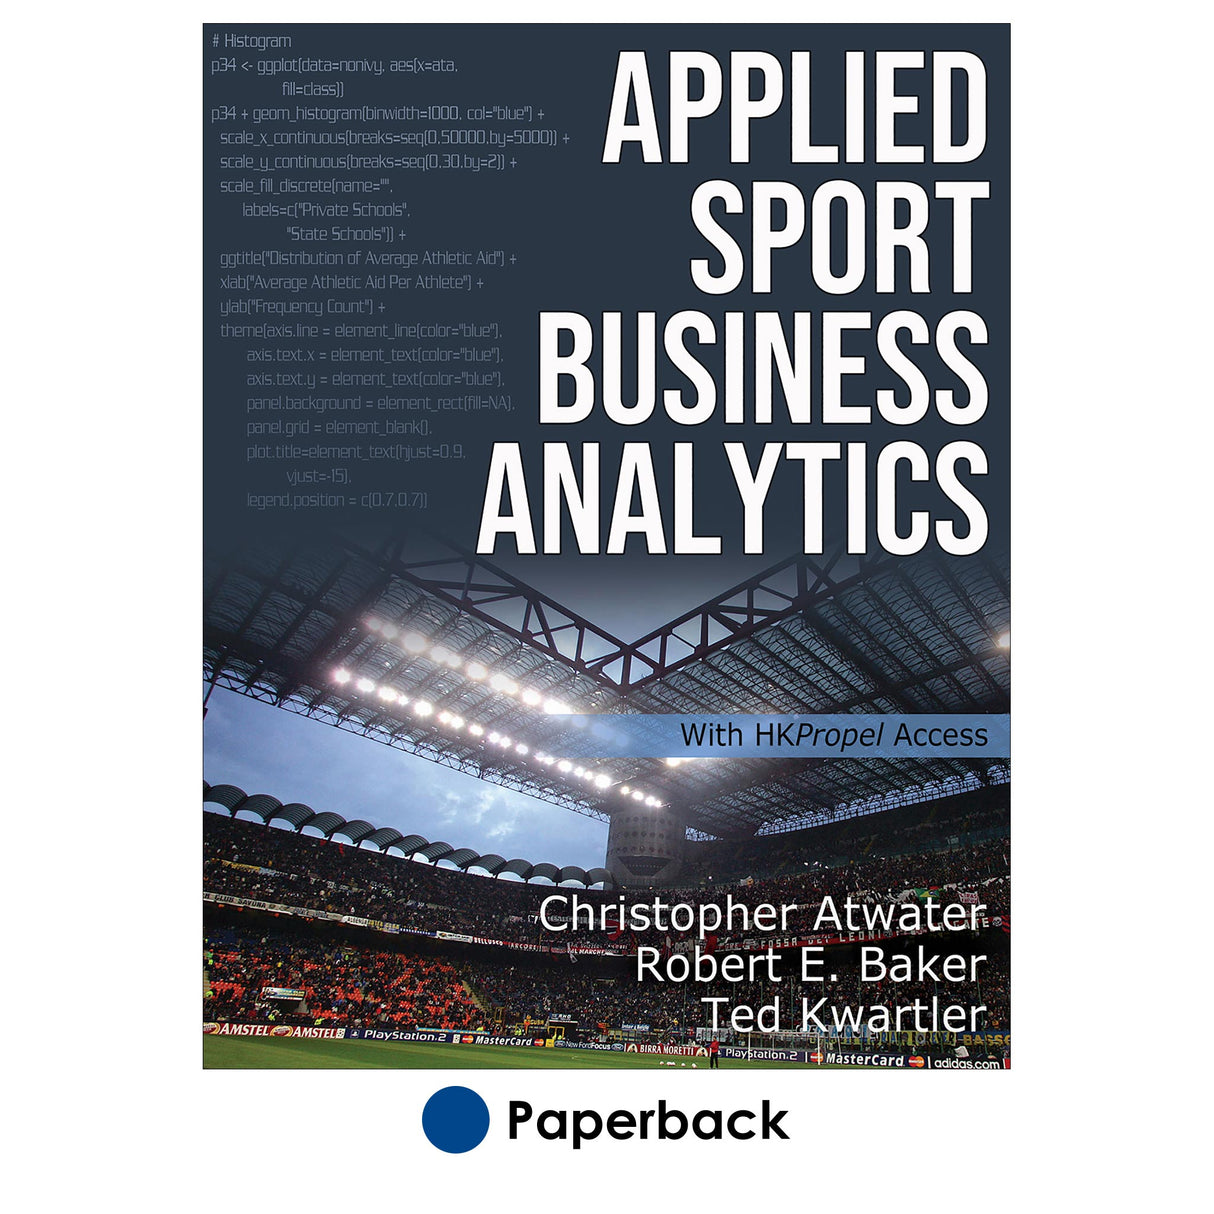 Applied Sport Business Analytics With HKPropel Access